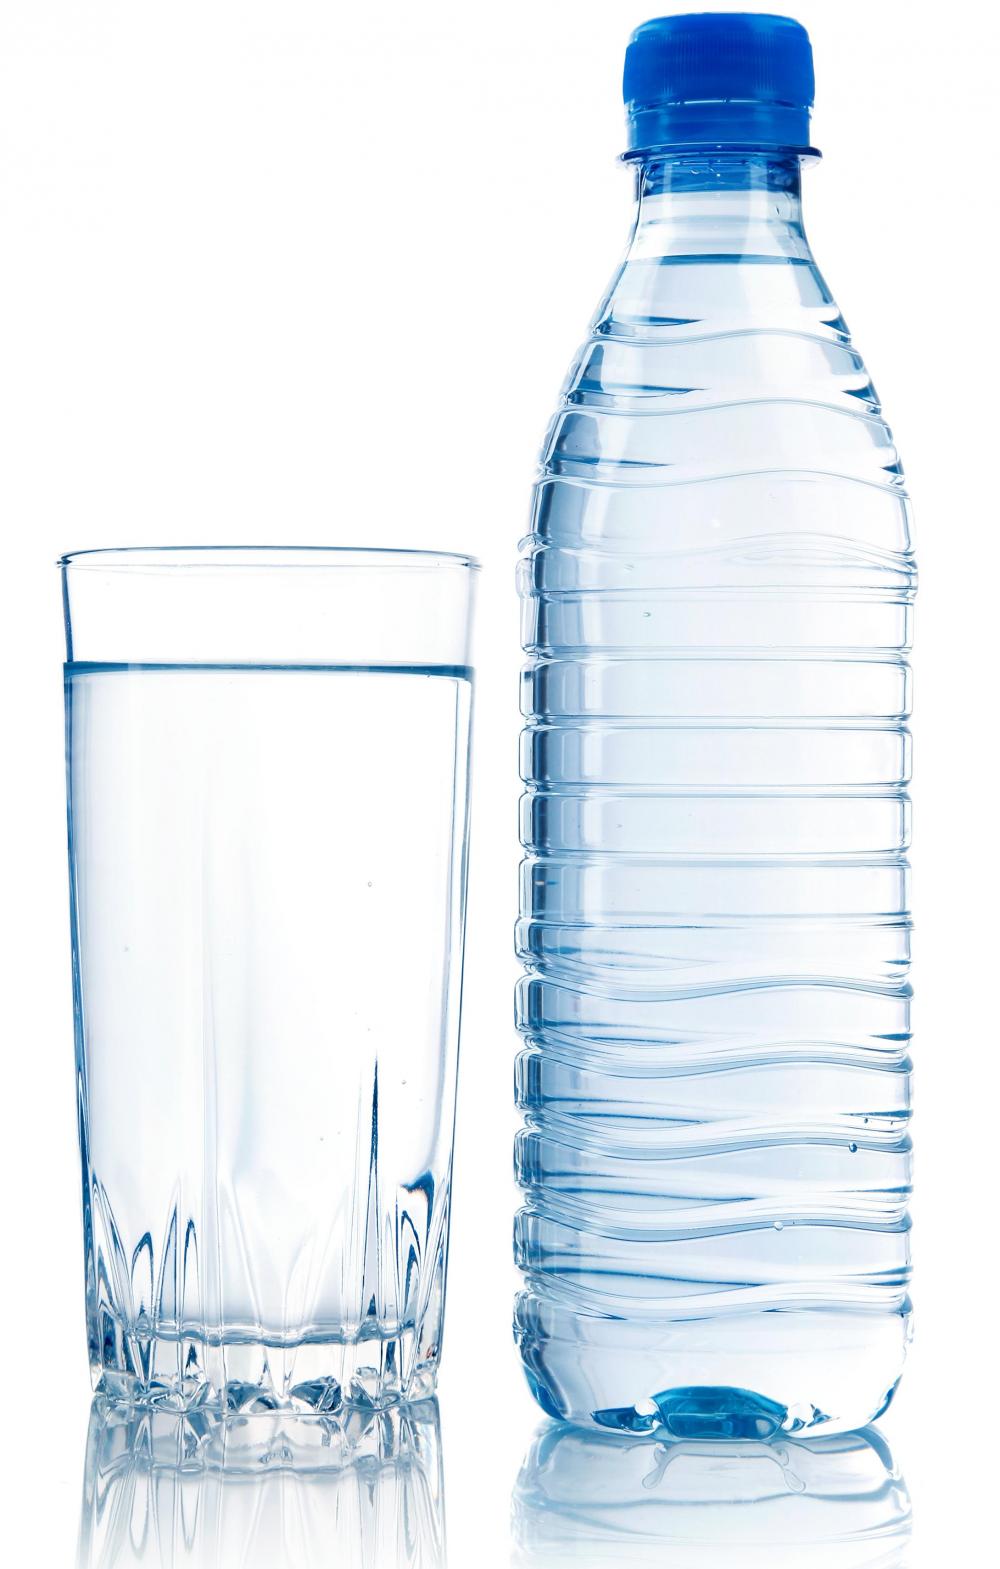 Glass of water and bottled water